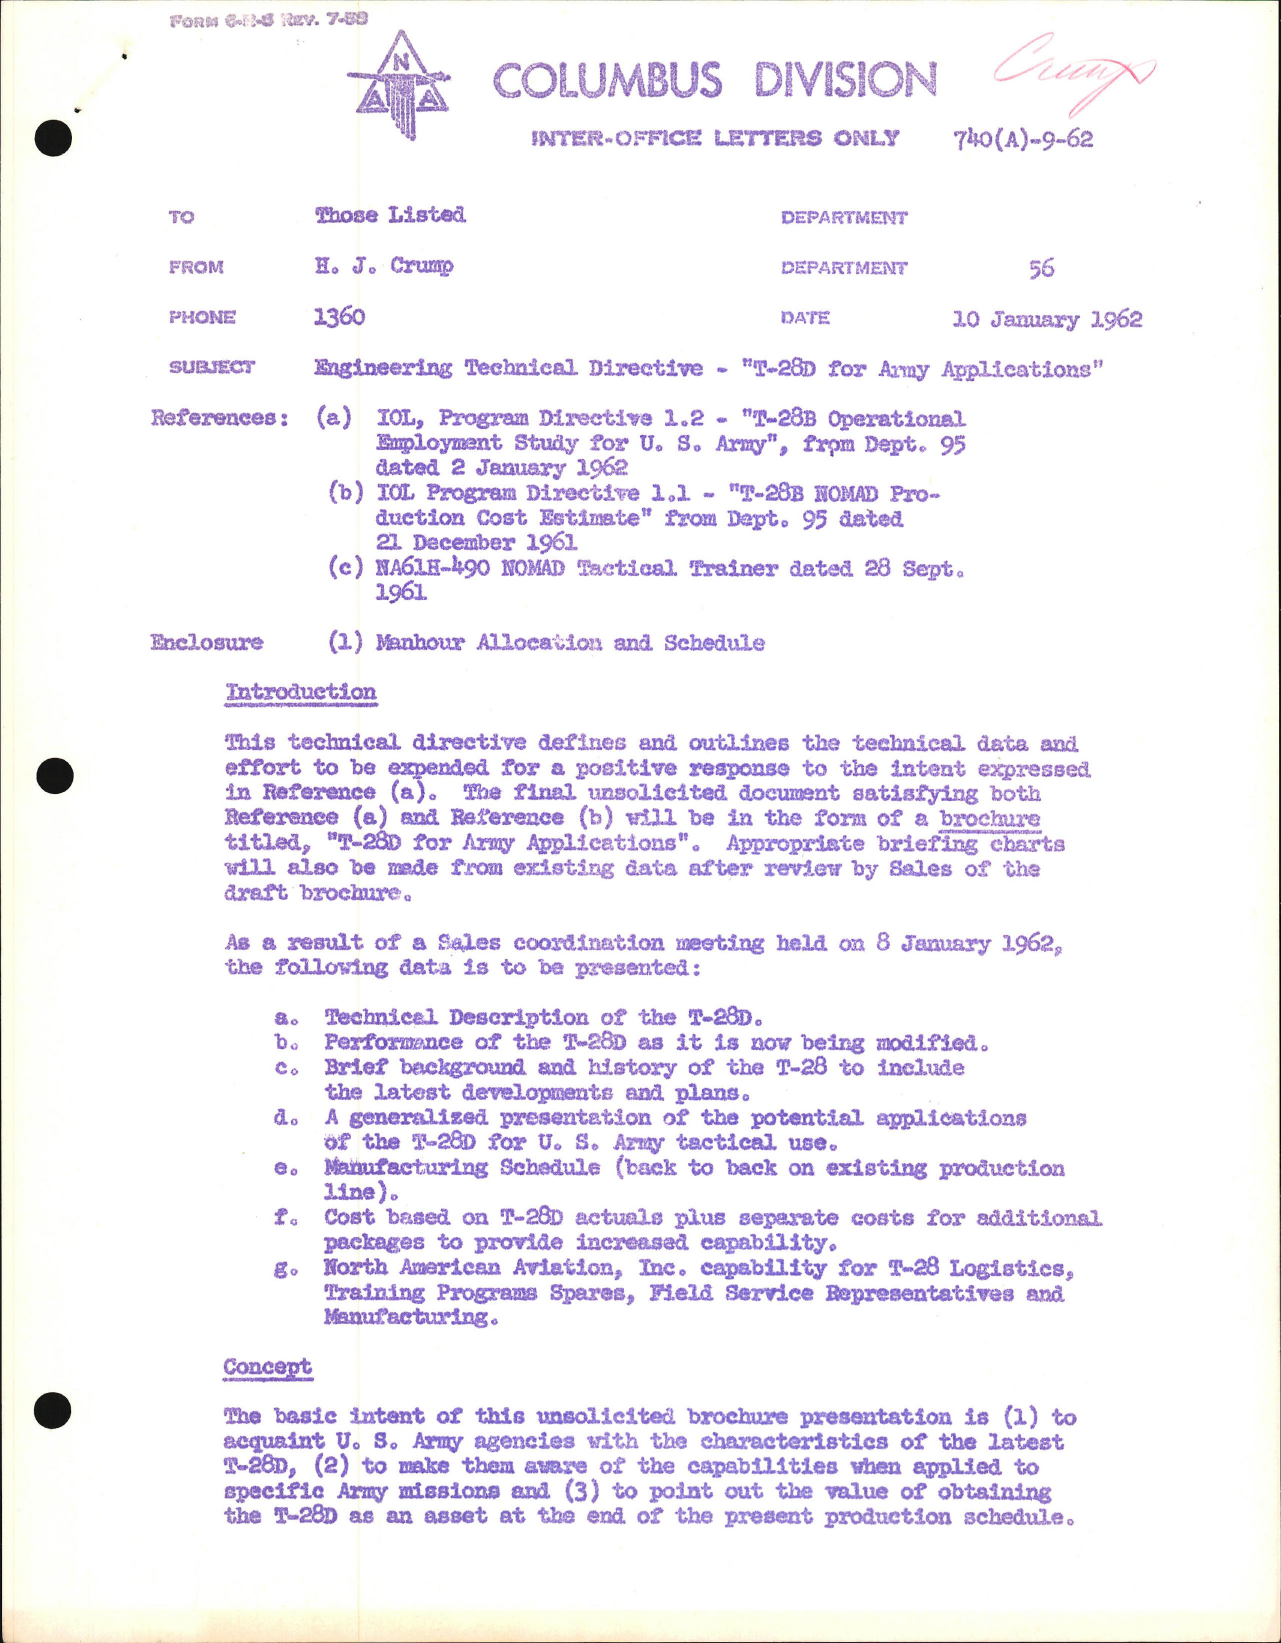 Sample page 1 from AirCorps Library document: Engineering Technical Directive for T-28 Army Applications